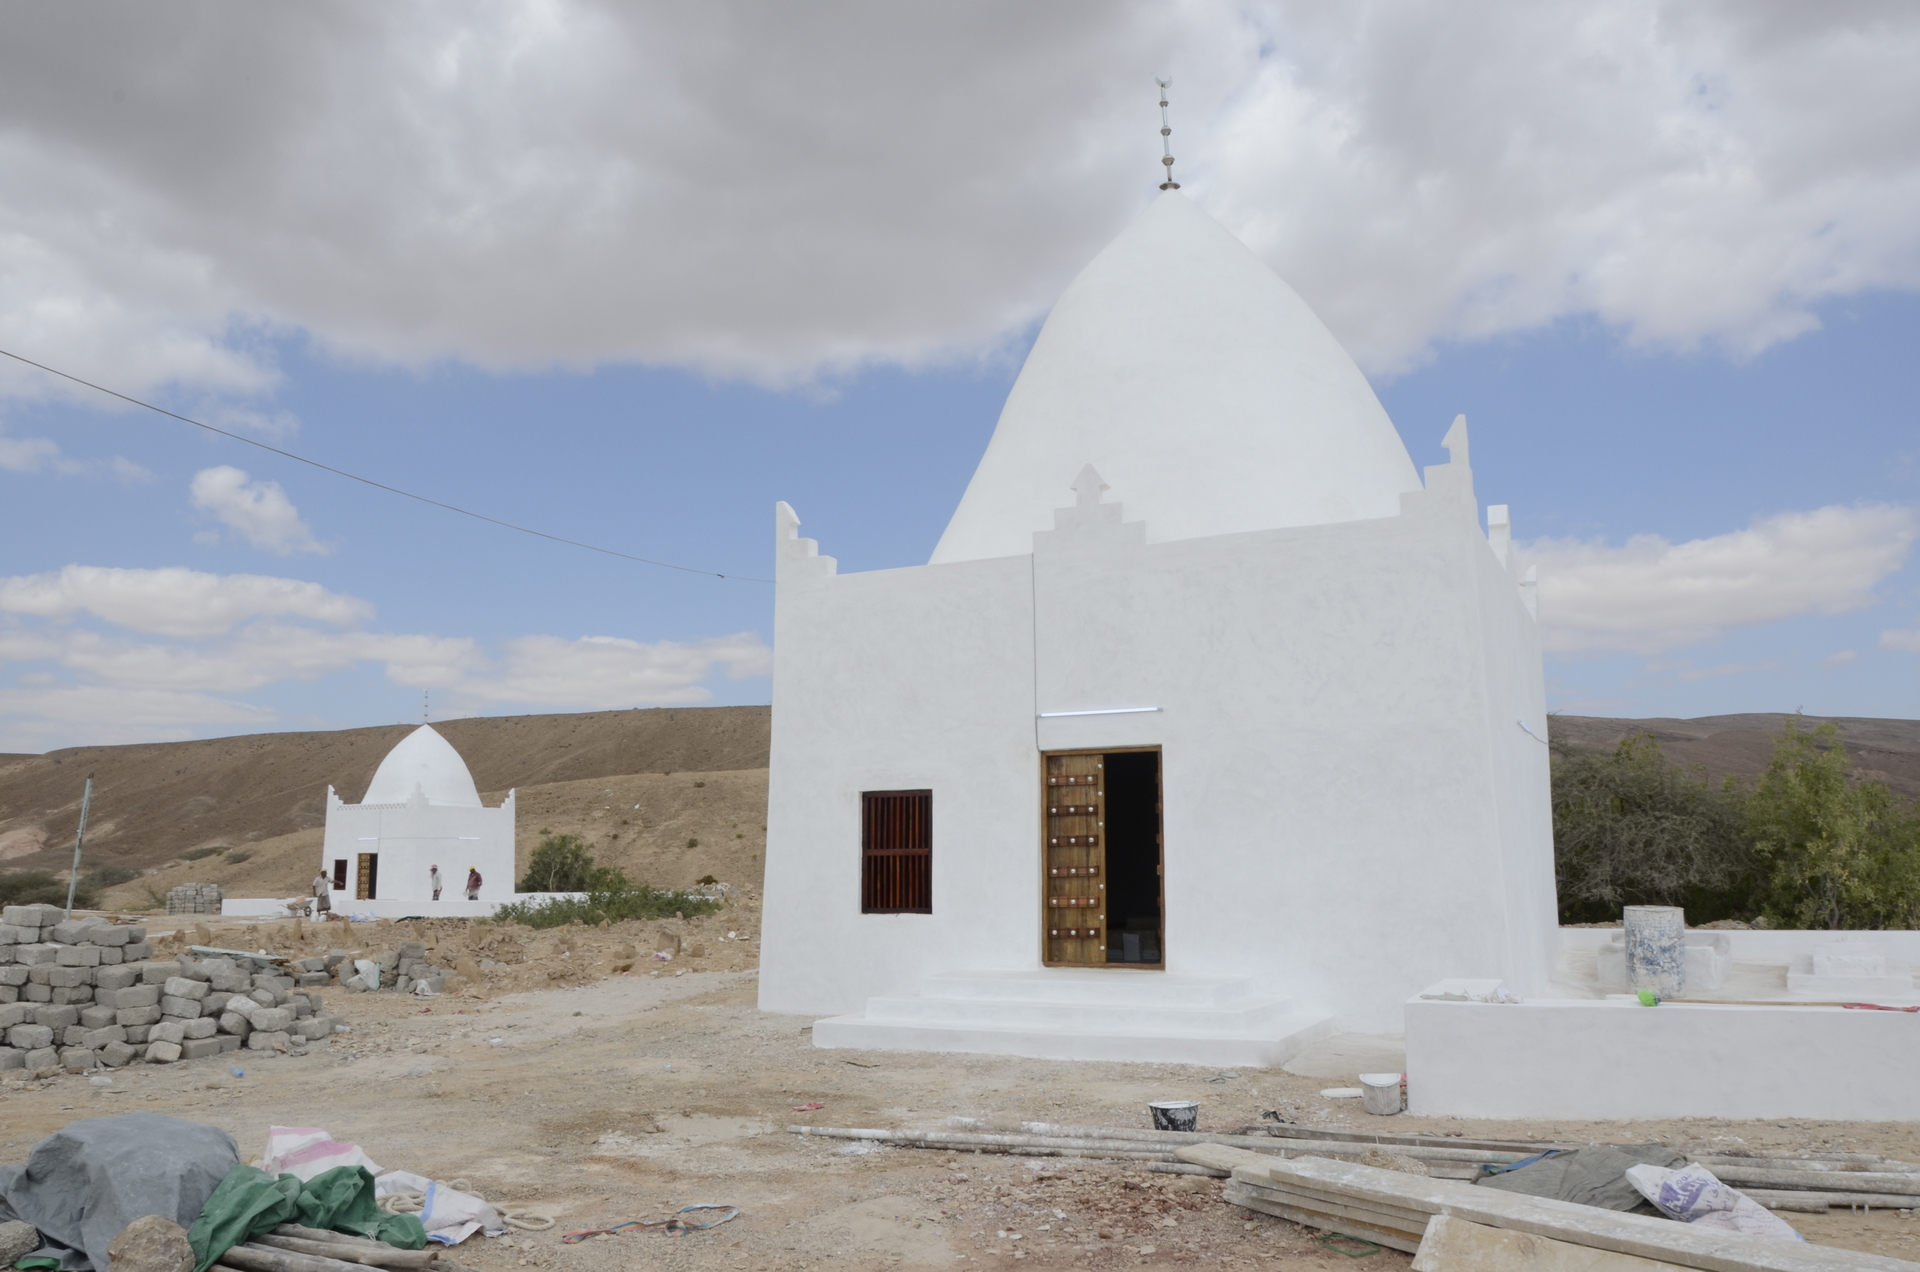 <p>Using traditional building techniques and systems, and on-site capacity building, this project reconstructs cultural landmarks damaged or destroyed in Yemen’s 2015-17 conflict - including mosques and important Sufi shrines.</p>